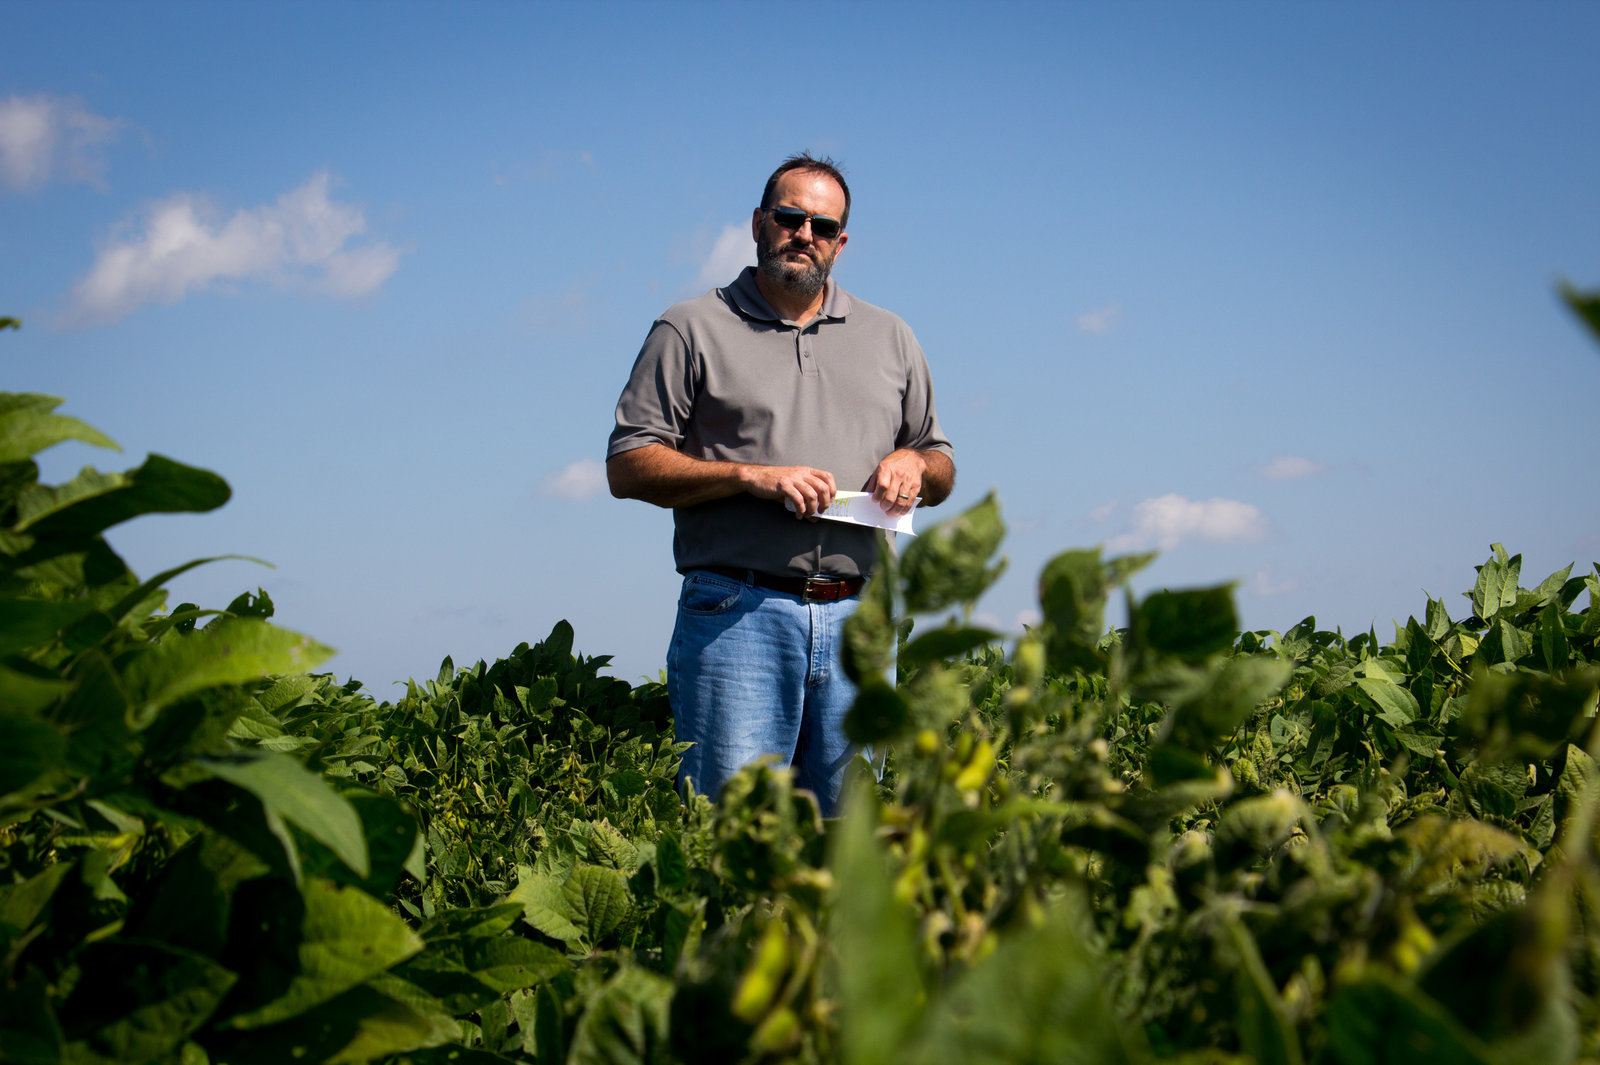 Bob Scott, a weed scientist at the University of Arkansas, and his colleagues conducted experiments on the effects of dicamba drift on nearby crops.